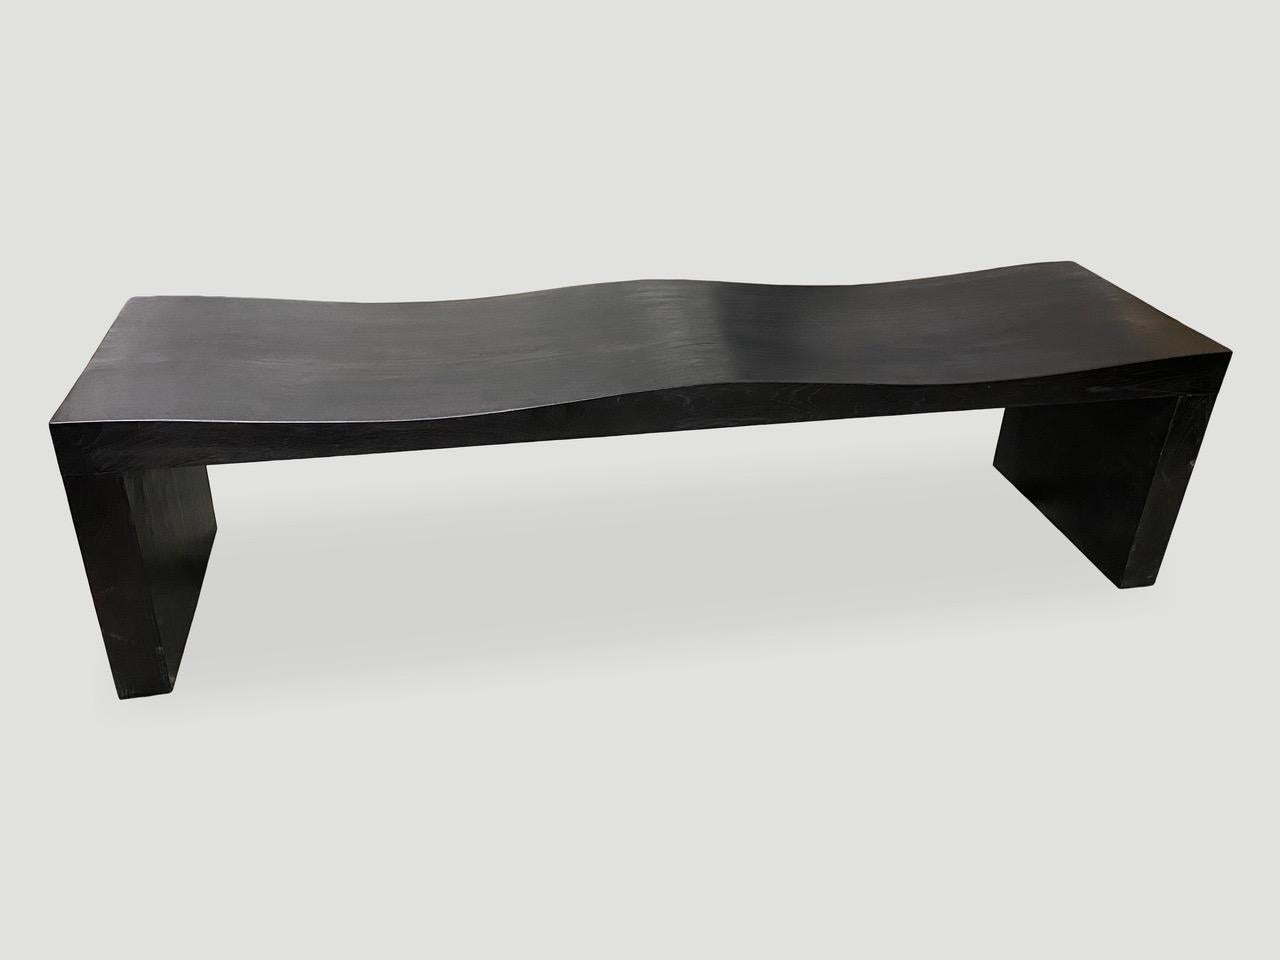 Andrianna Shamaris Charred Teak Wood Wave Bench In Excellent Condition For Sale In New York, NY